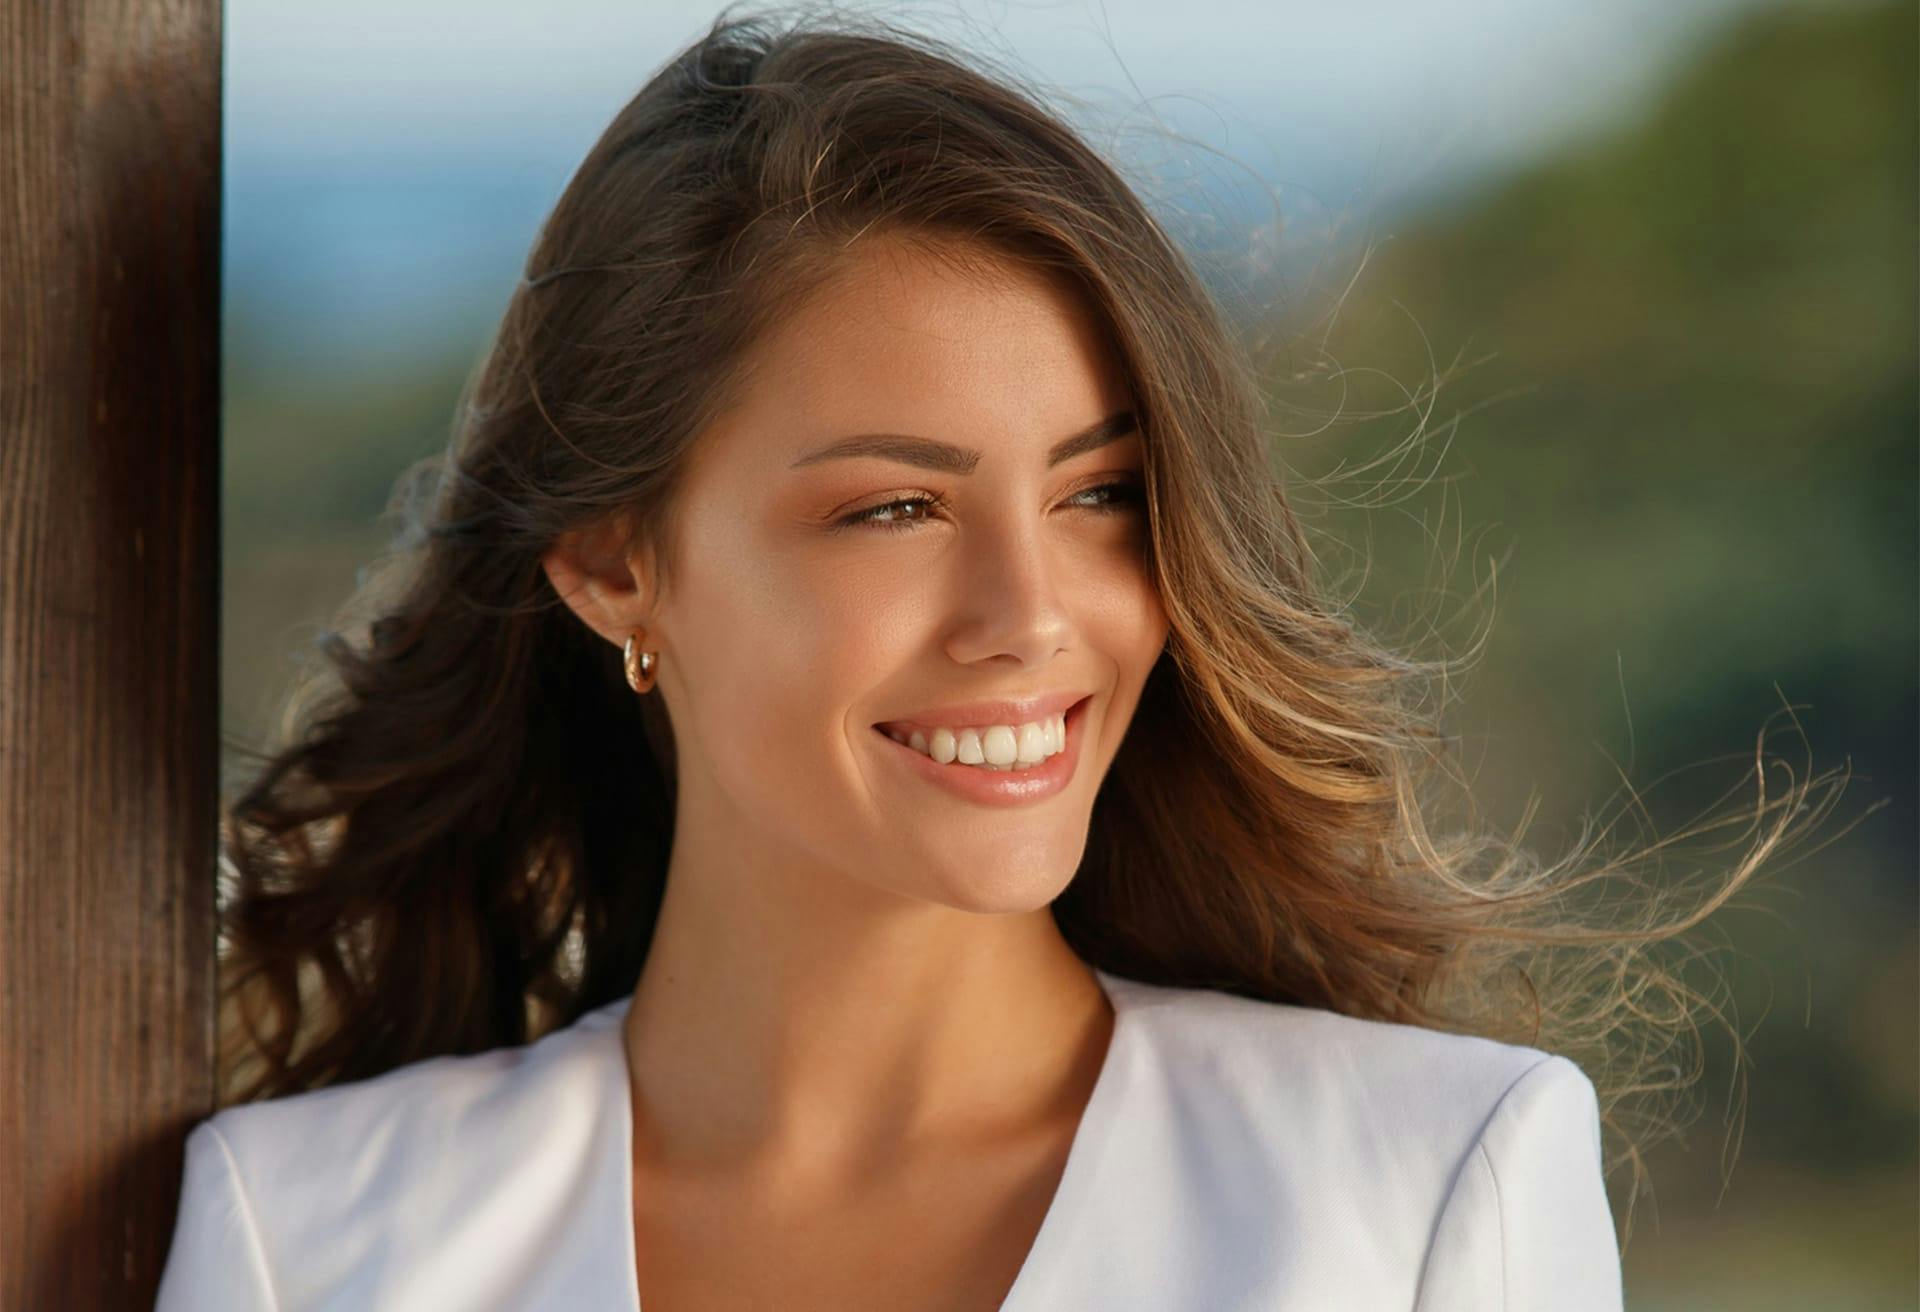 brunette woman looking off to the side of the camera smiling in a white blazer